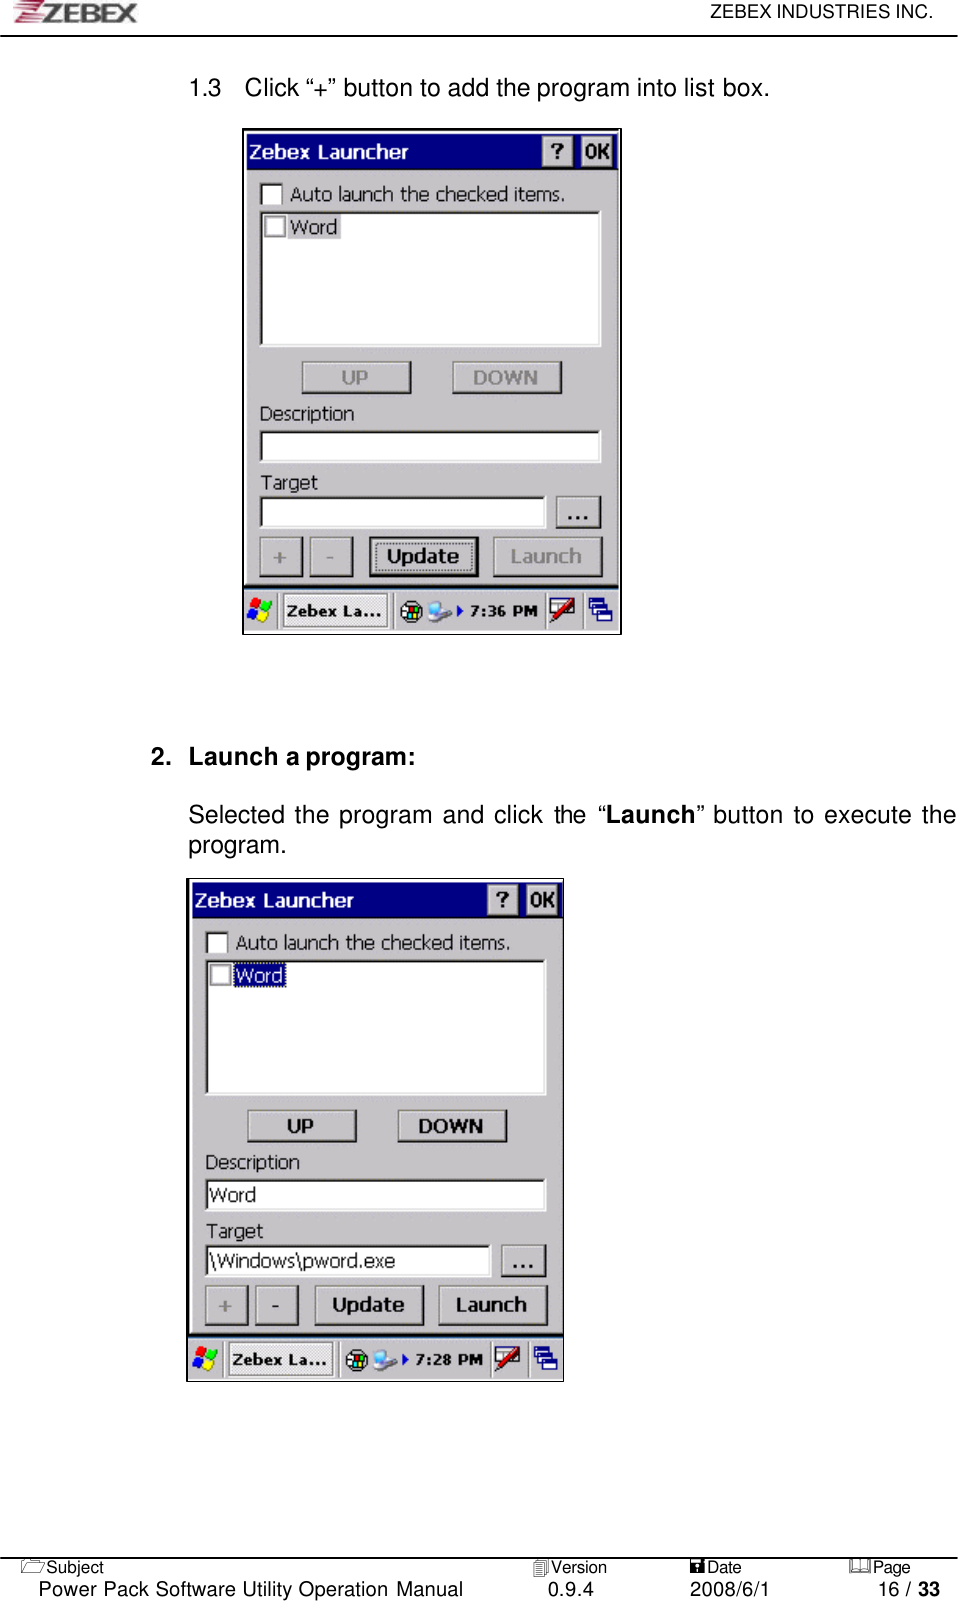     ZEBEX INDUSTRIES INC.   1Subject 4Version           =Date &amp;Page  Power Pack Software Utility Operation Manual 0.9.4    2008/6/1          16 / 33 1.3 Click “+” button to add the program into list box.                         2.   Launch a program:  Selected the program and click  the “Launch” button to execute the program.                            